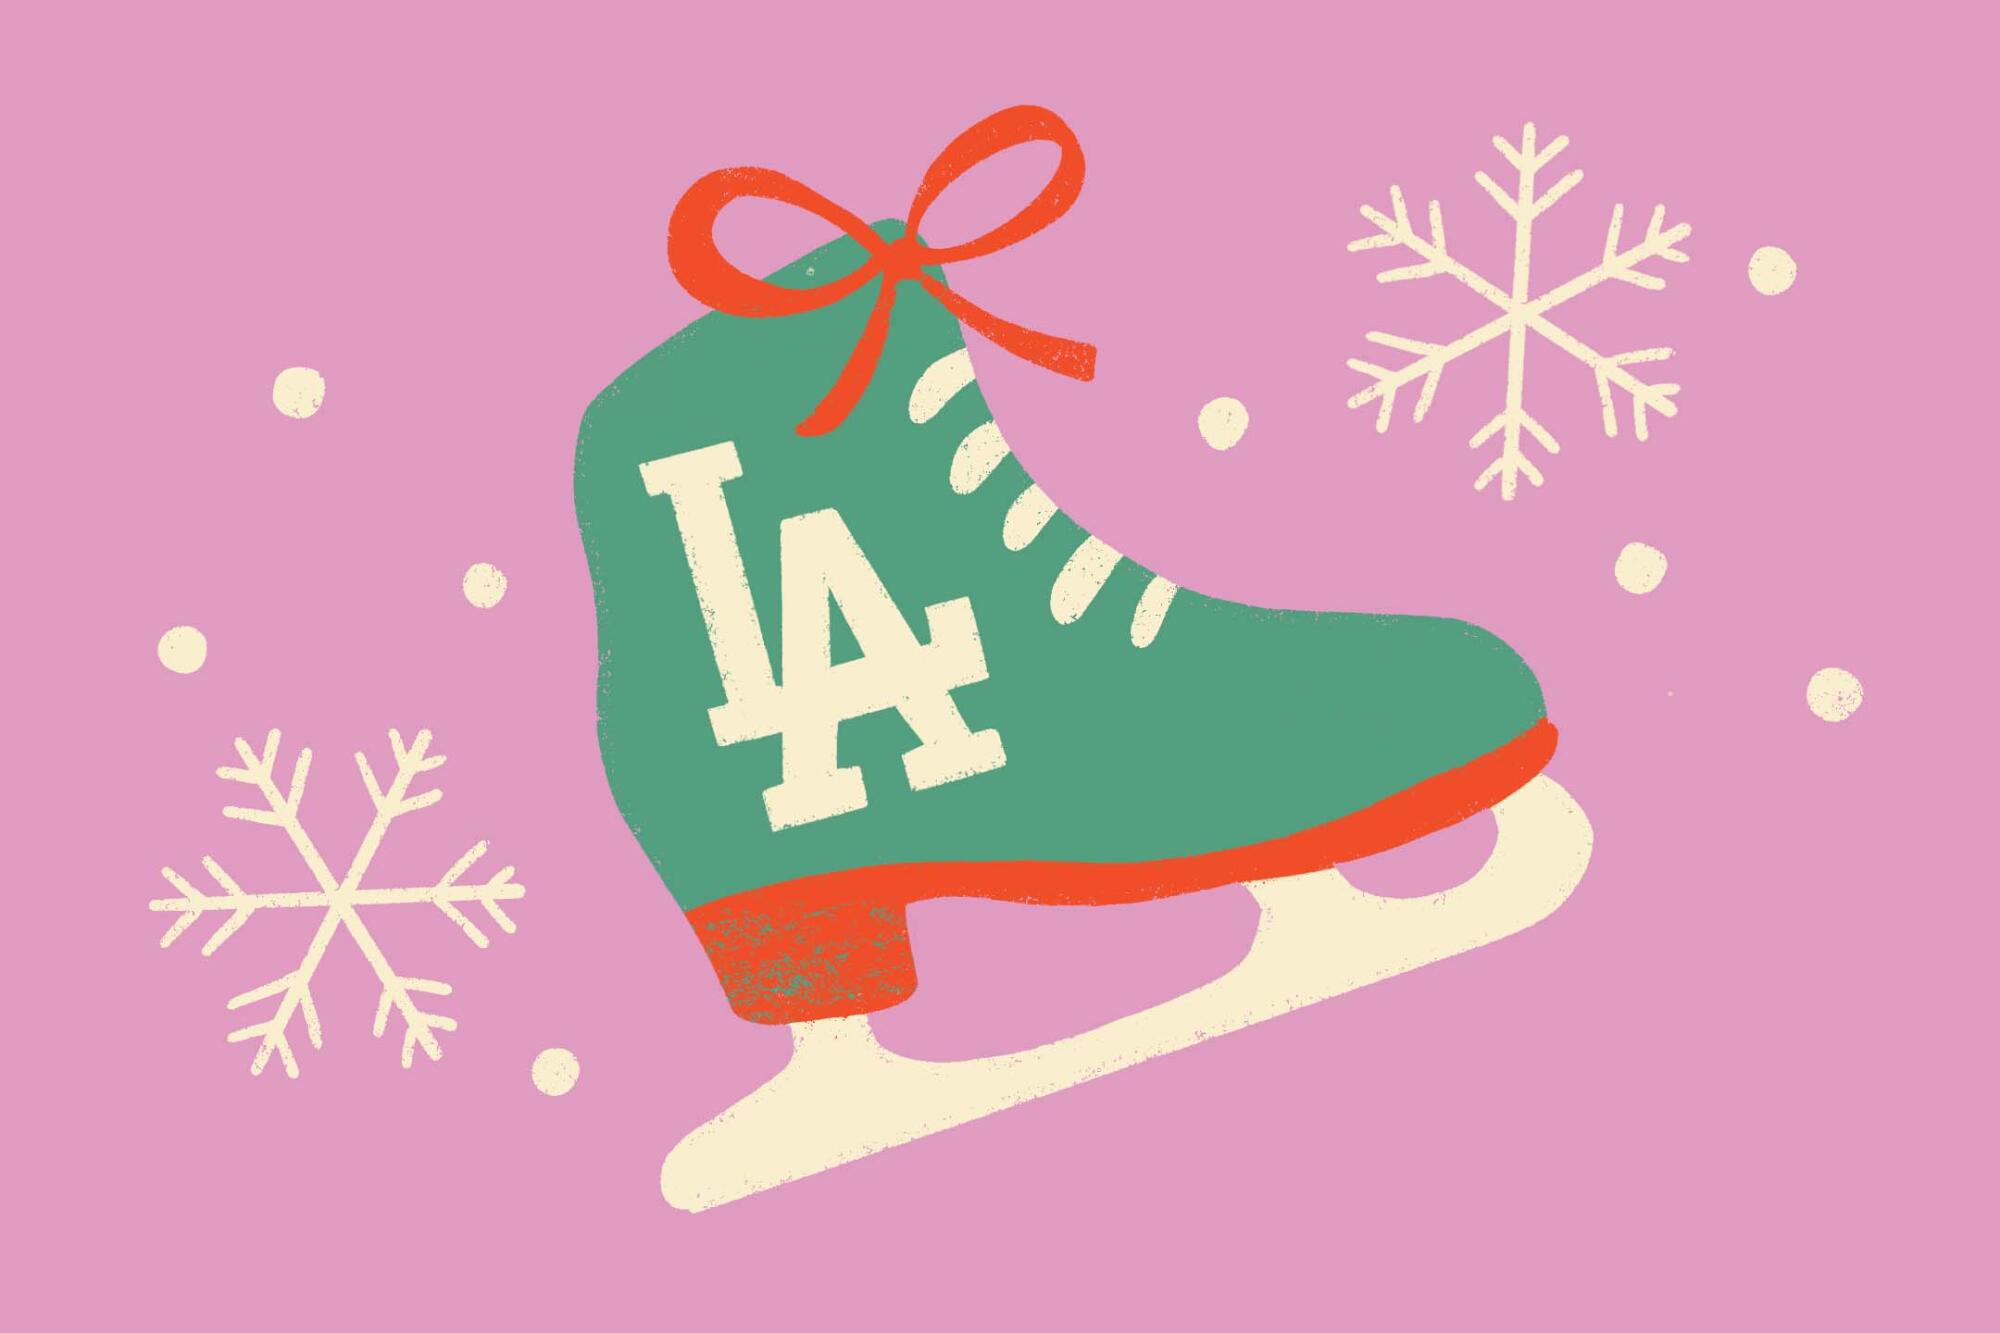 Illustration of an ice skate with the Dodgers logo on it.